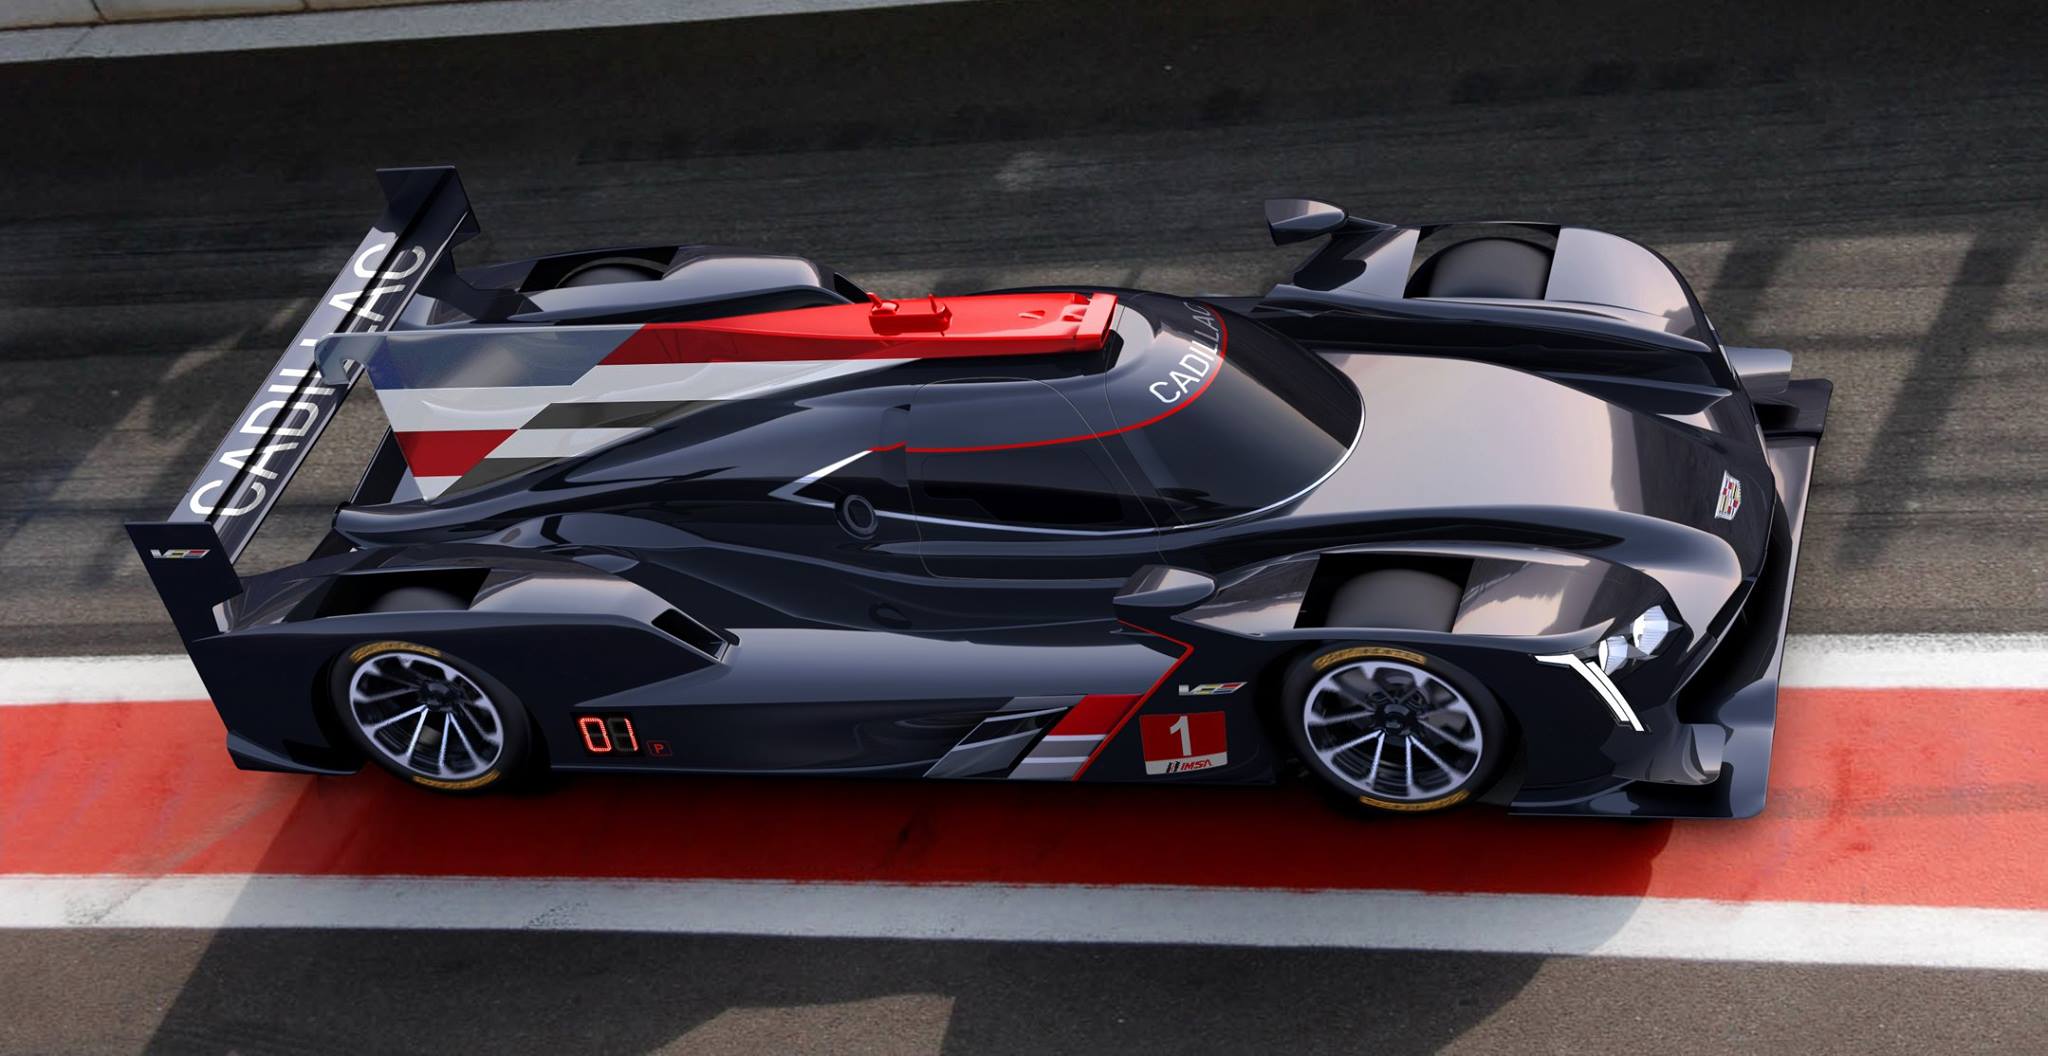 Cadillac returning to prototype endurance racing for first time in 14 years